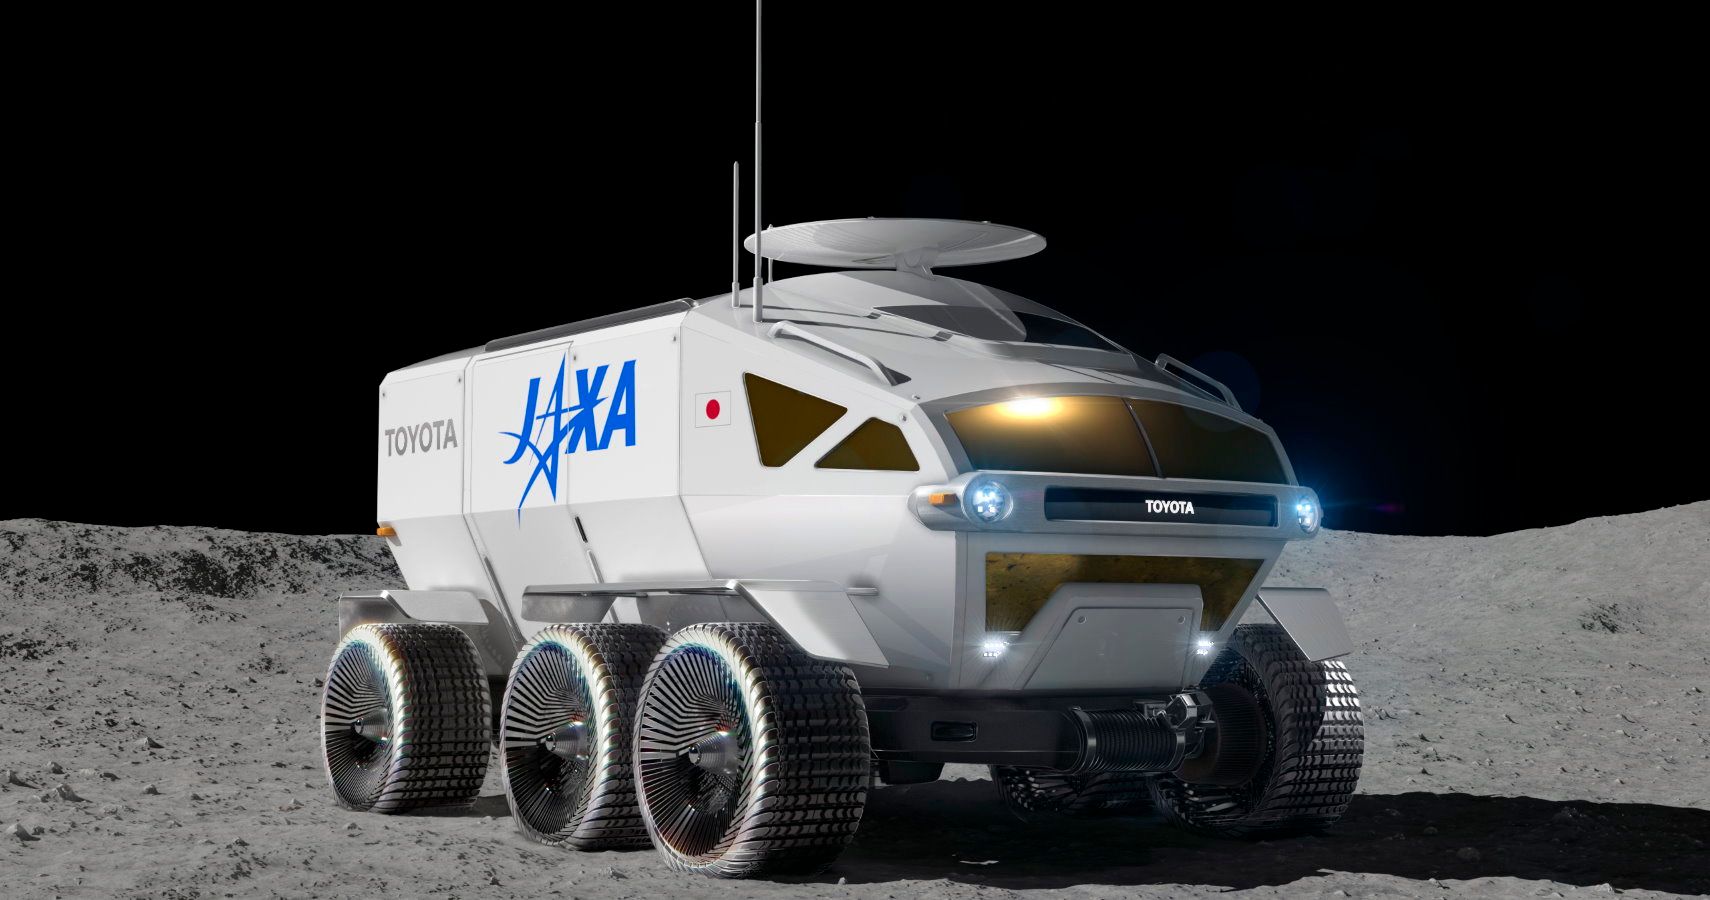 Toyota's Lunar Rover Will Arrive On The Moon First And Autonomously Drive Out To Meet Astronoauts